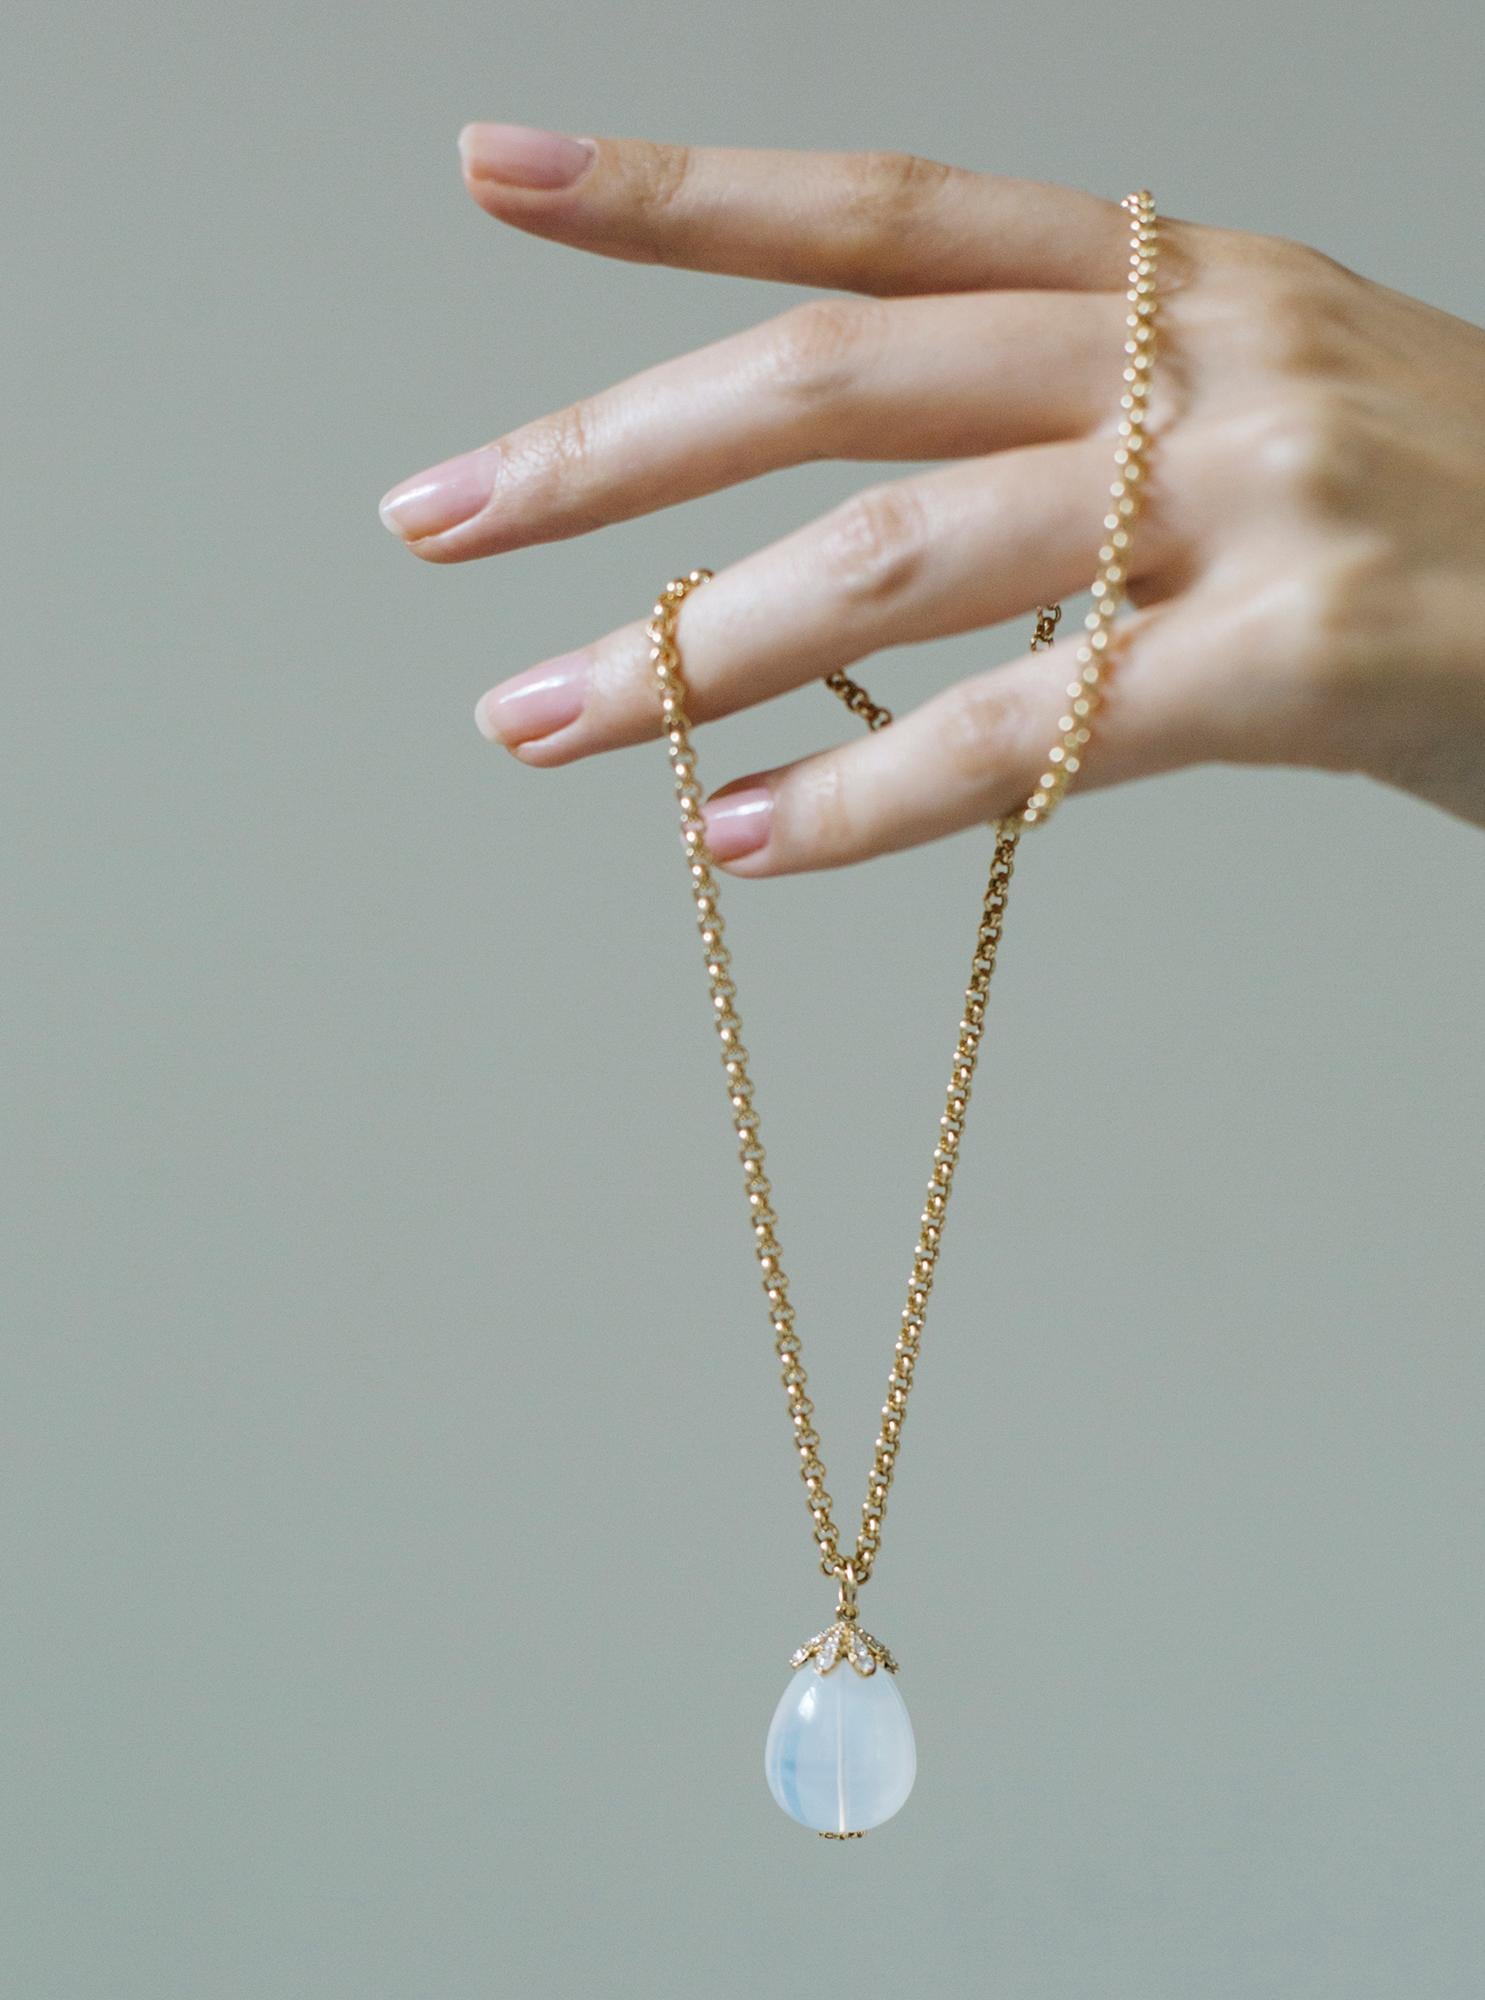 This Large Moon Quartz Pendant with Diamonds in 18K Yellow Gold is a stunning piece of jewelry from the 'Naughty' Collection. The pendant features a large moon quartz gemstone surrounded by a dazzling array of diamonds in the cap, set in a lustrous